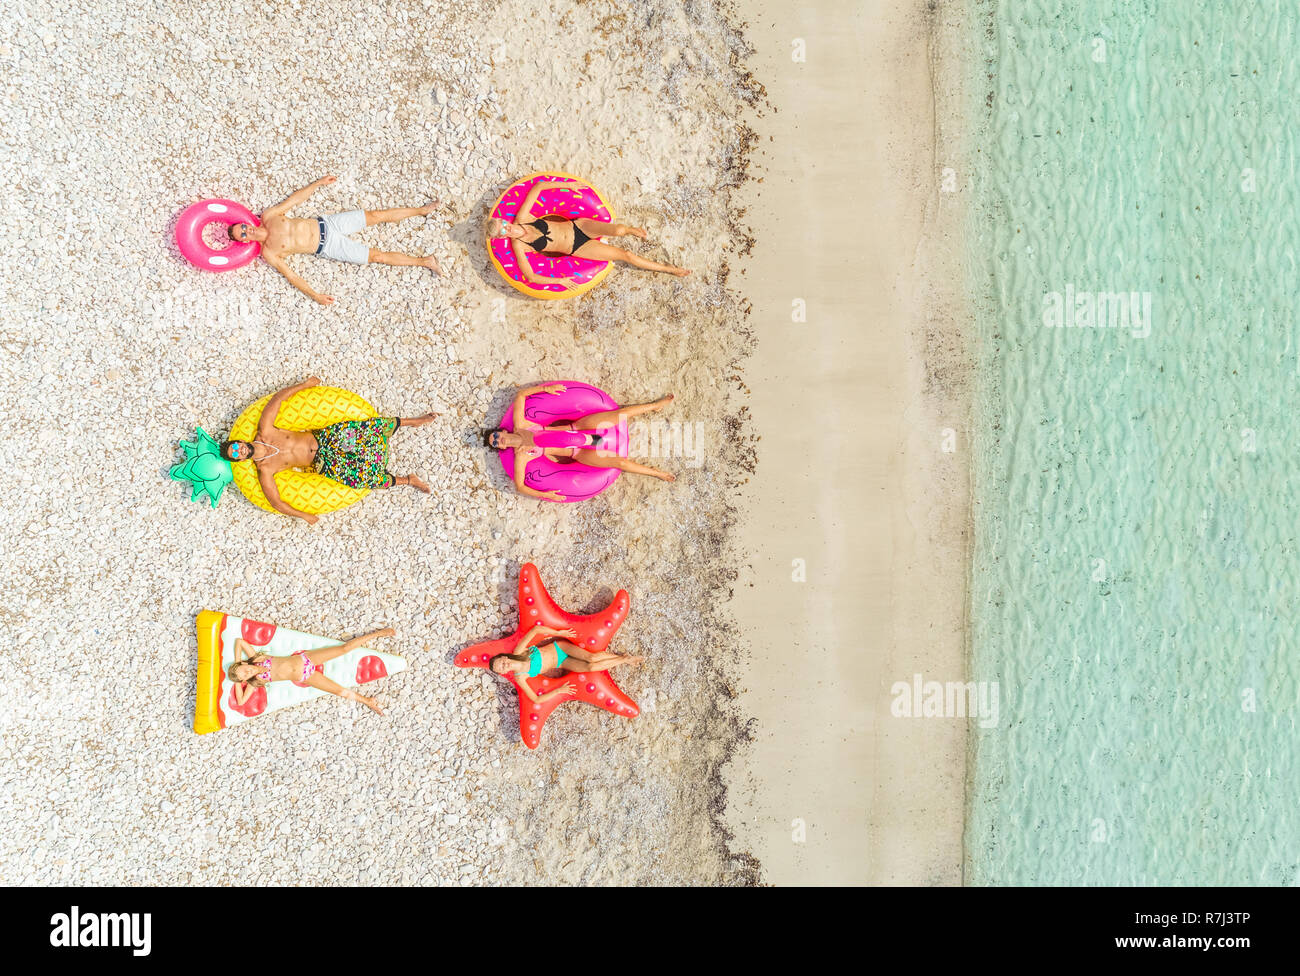 Aerial view of people lying on inflatable pineapple, pizza, star, donut, flamingo shaped mattresses on beach. Stock Photo